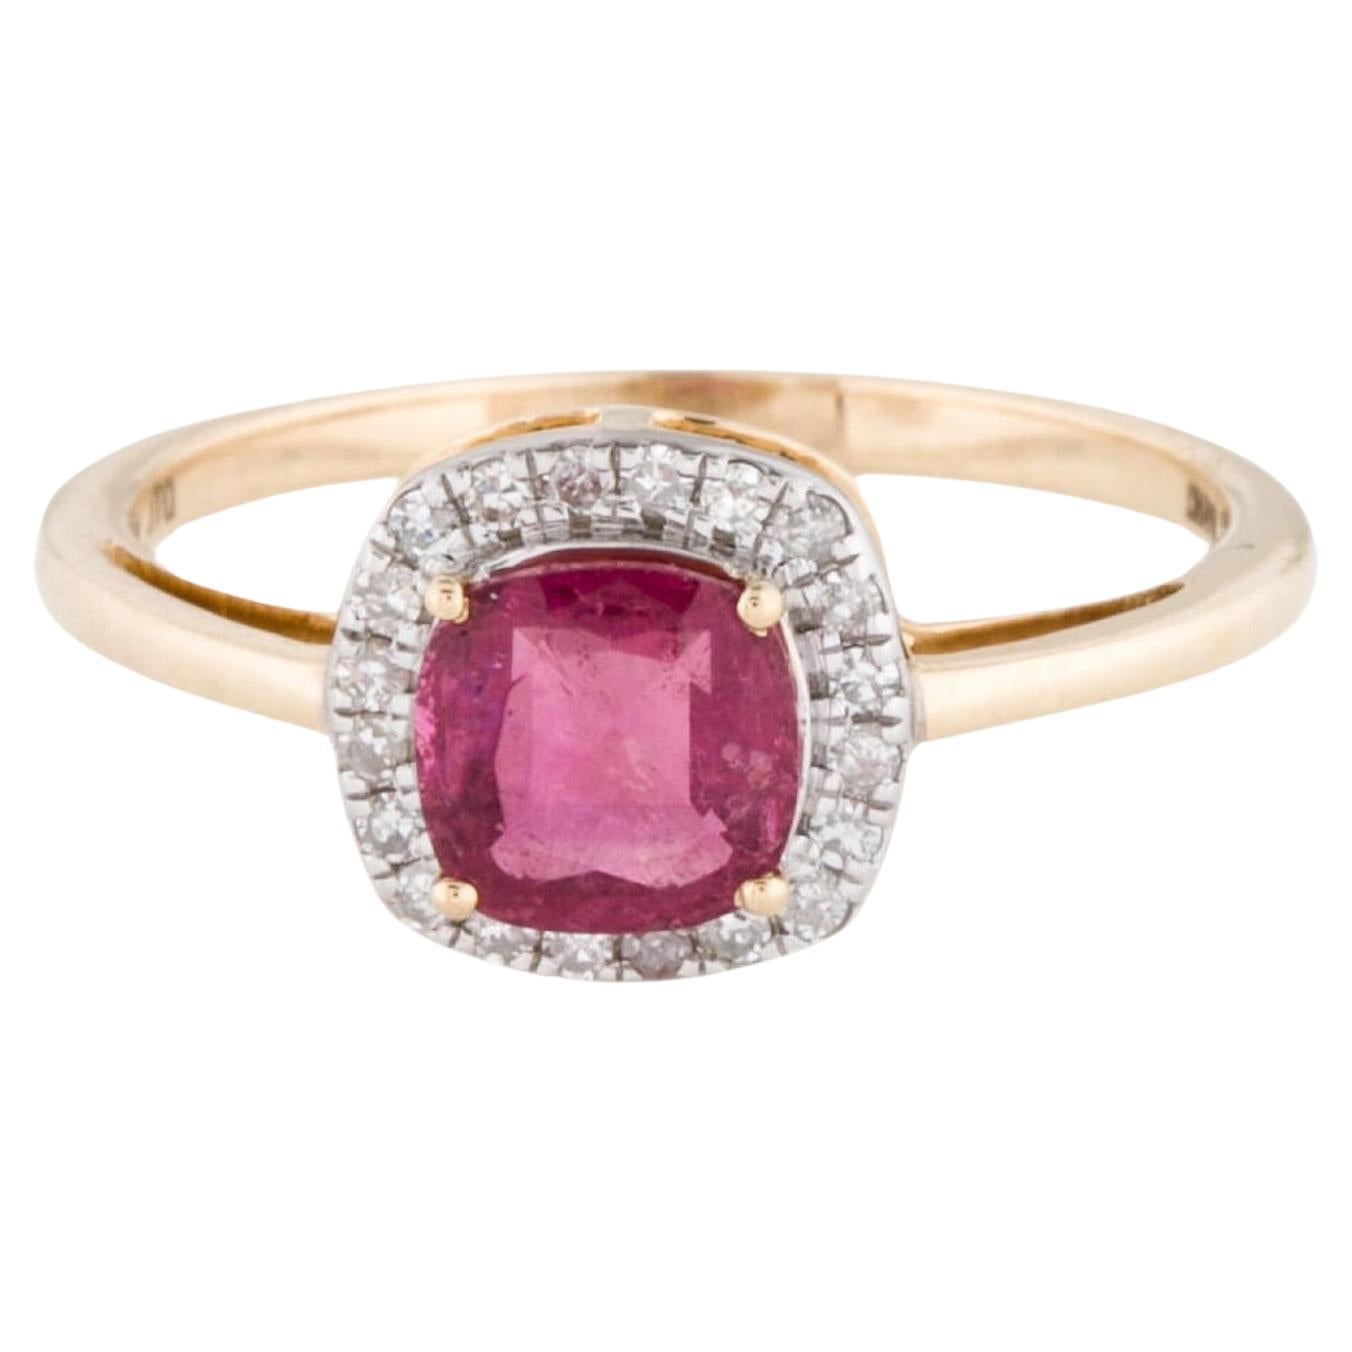 Exquisite 14K Tourmaline & Diamond Cocktail Ring - Size 6.75 - Timeless Luxury For Sale